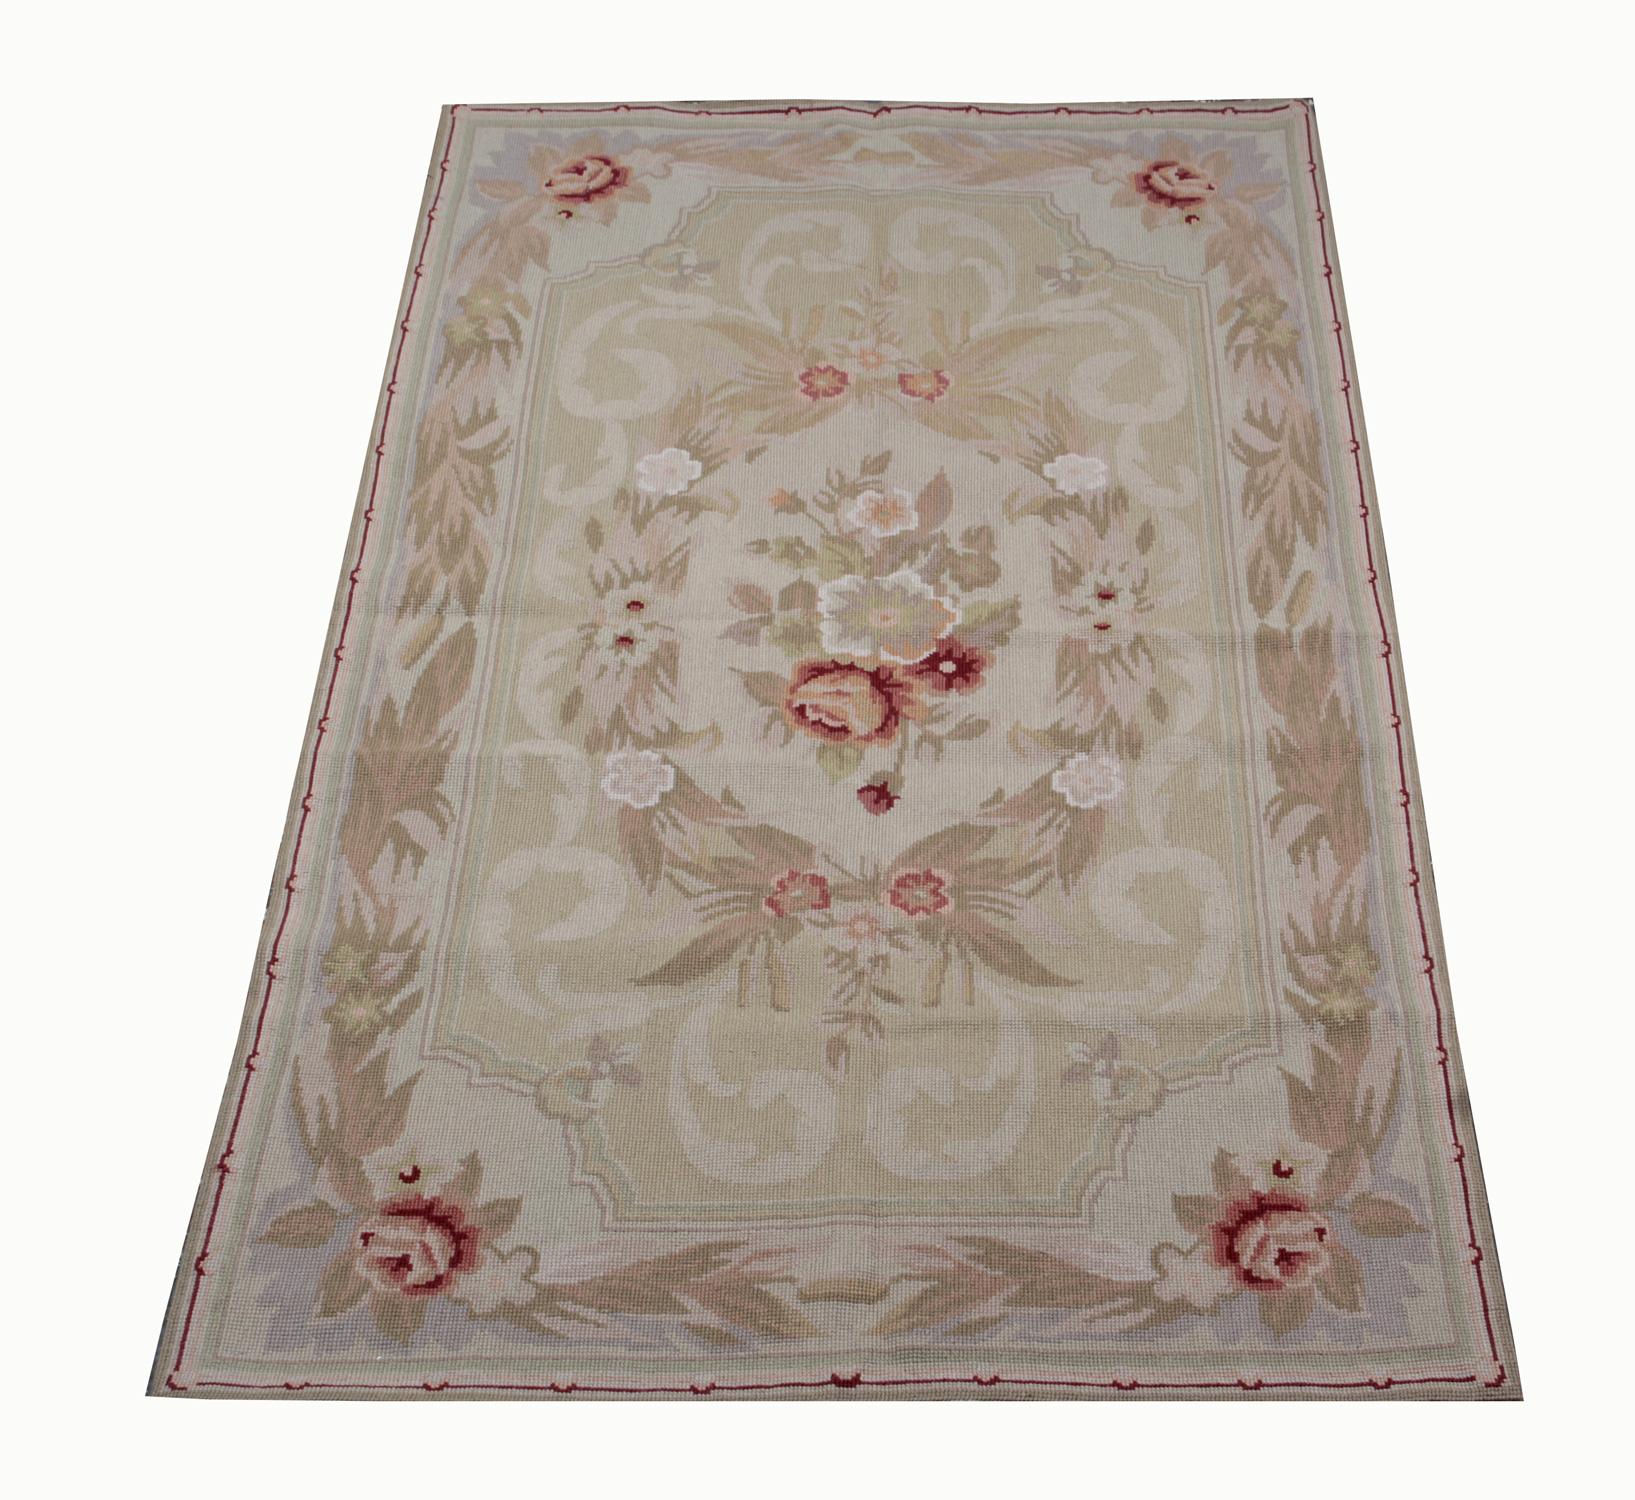 This floral needlepoint rug has been woven with a subtle cream background, decorated with asymmetrical ornate design with pink floral details and foliate scrolls in both the centre and border. The color and design both sit in harmony creating a